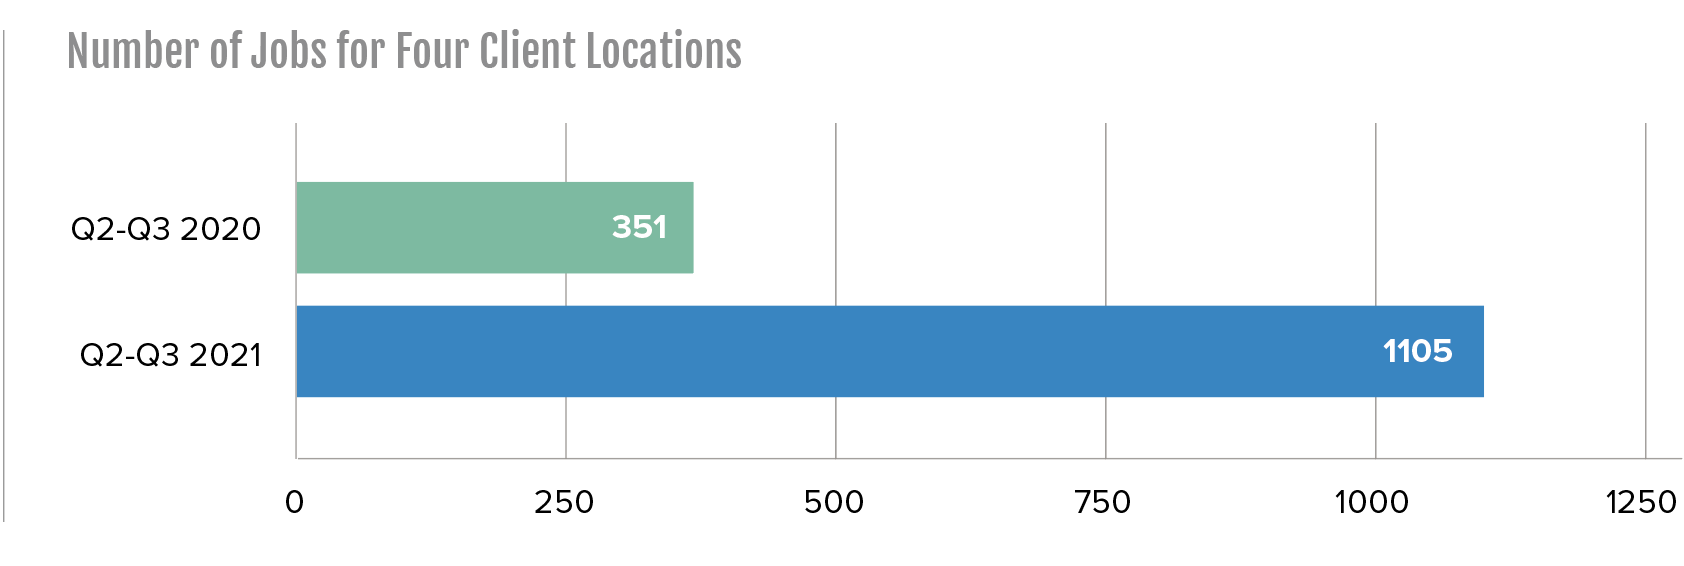 total number of jobs for four client locations